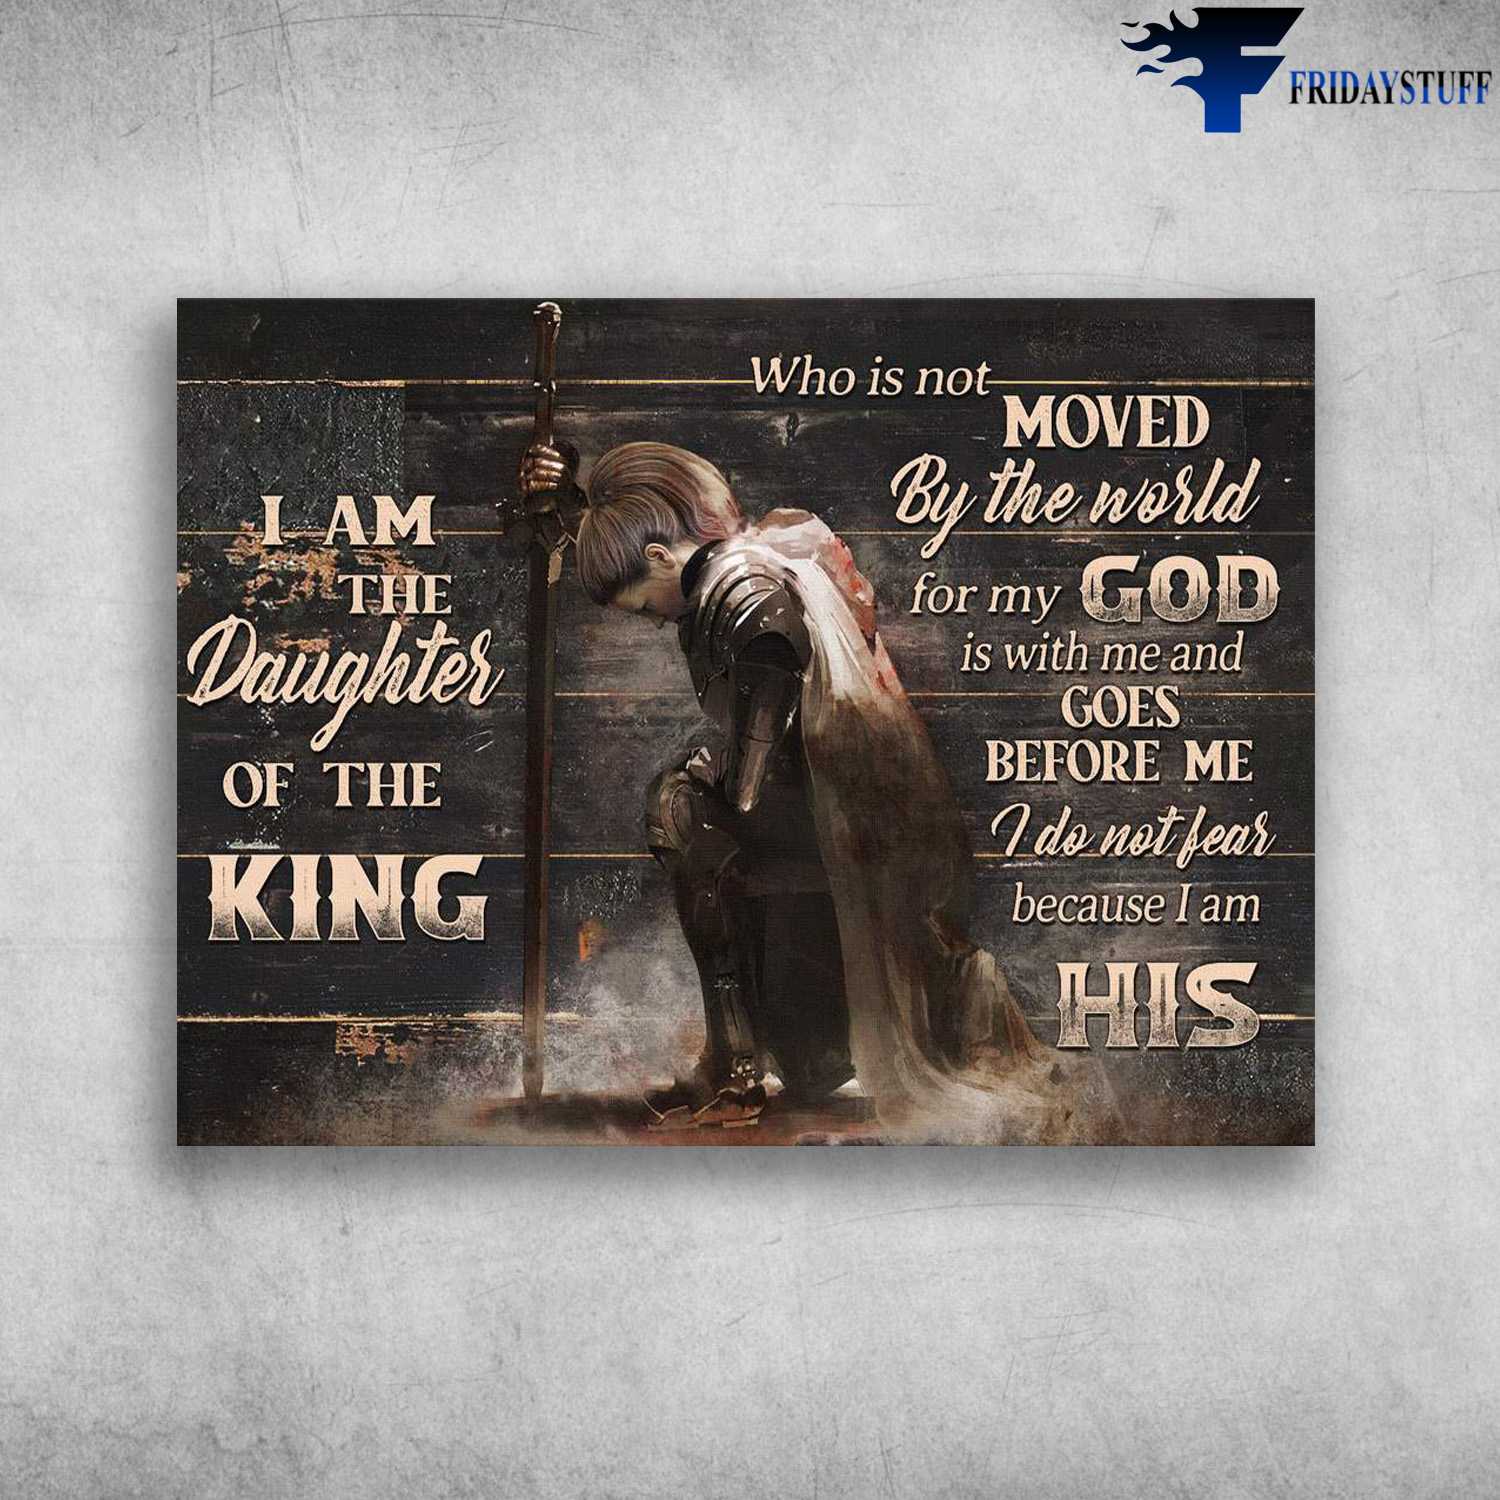 Female Warrior - I Am The Daughter Of The King, Who Is Not Moved, By The World For My God, Is With Me And Goes Before Me, I Do Not Fear Because I Am His